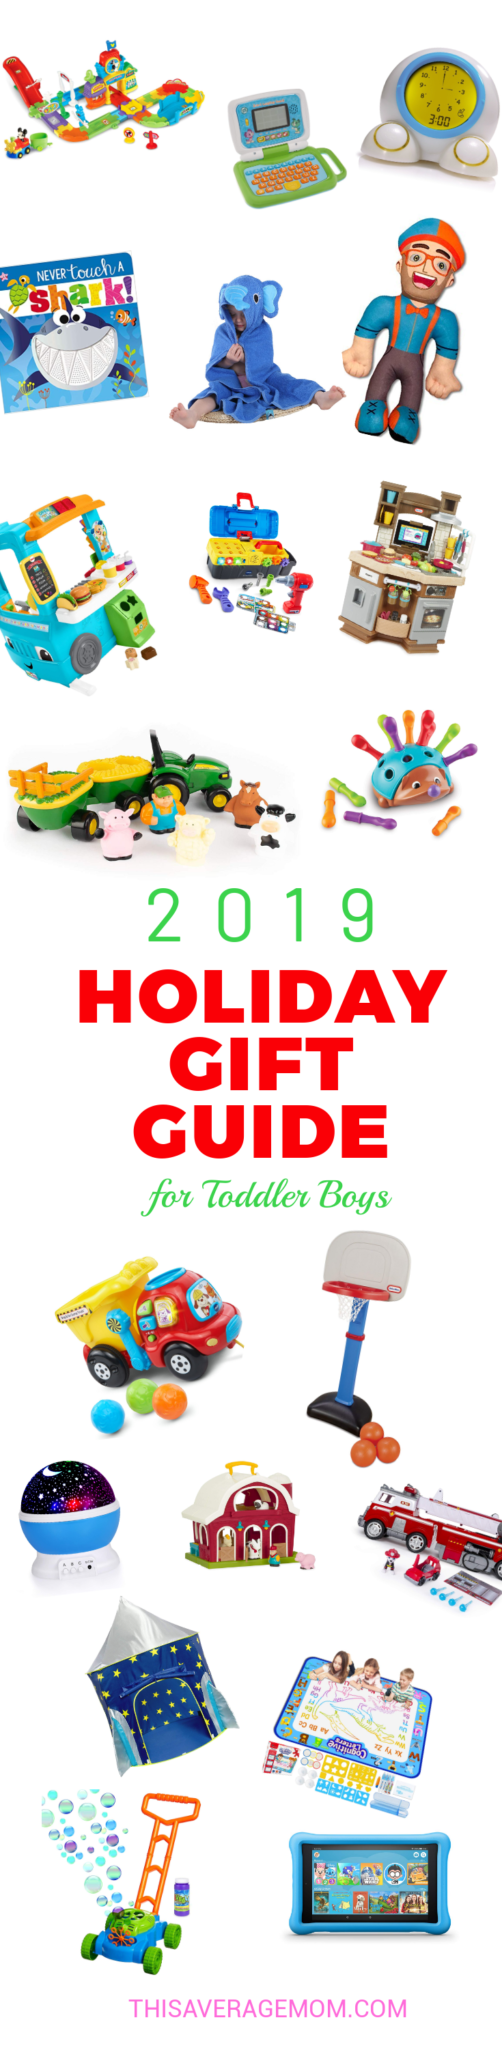 Need some gift ideas for toddler boys? I have you covered! Here’s 20 toys that boys 1-3 (and beyond!) will love this Christmas. #christmaslist #santa #holidays